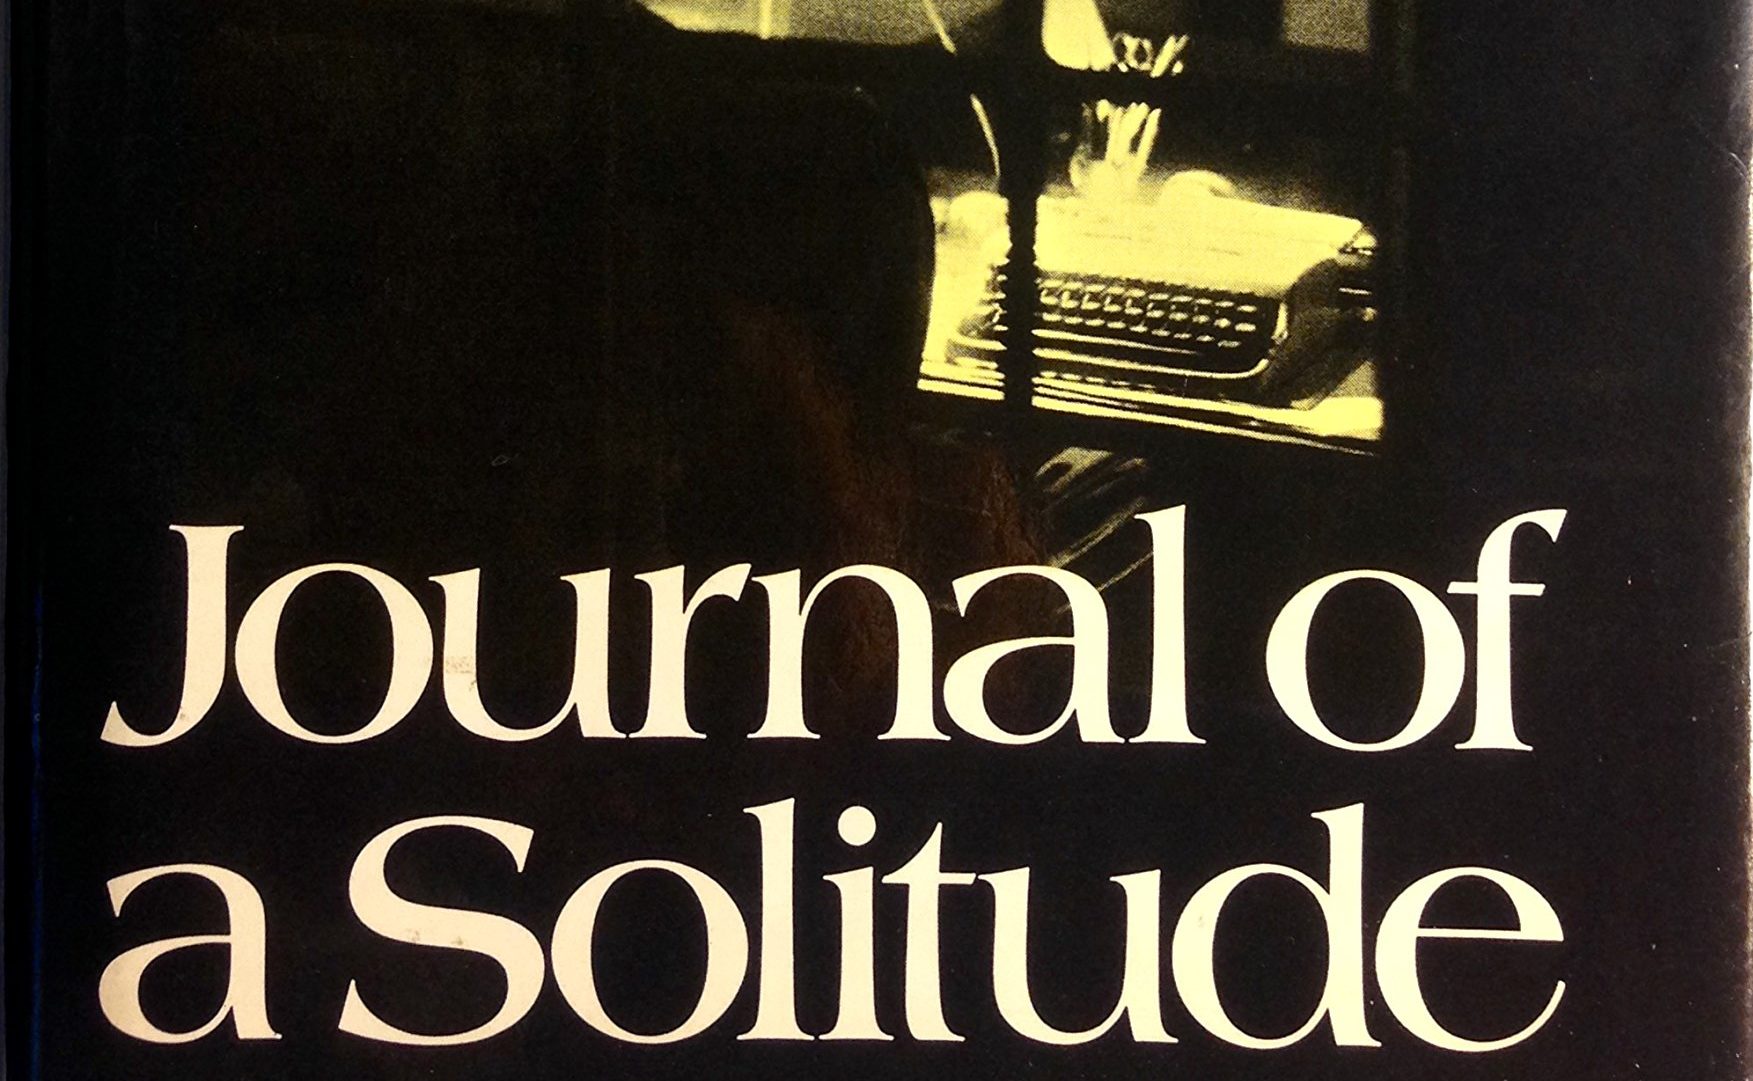 #8 „Making space to be there“: May Sartons Journal of a Solitude